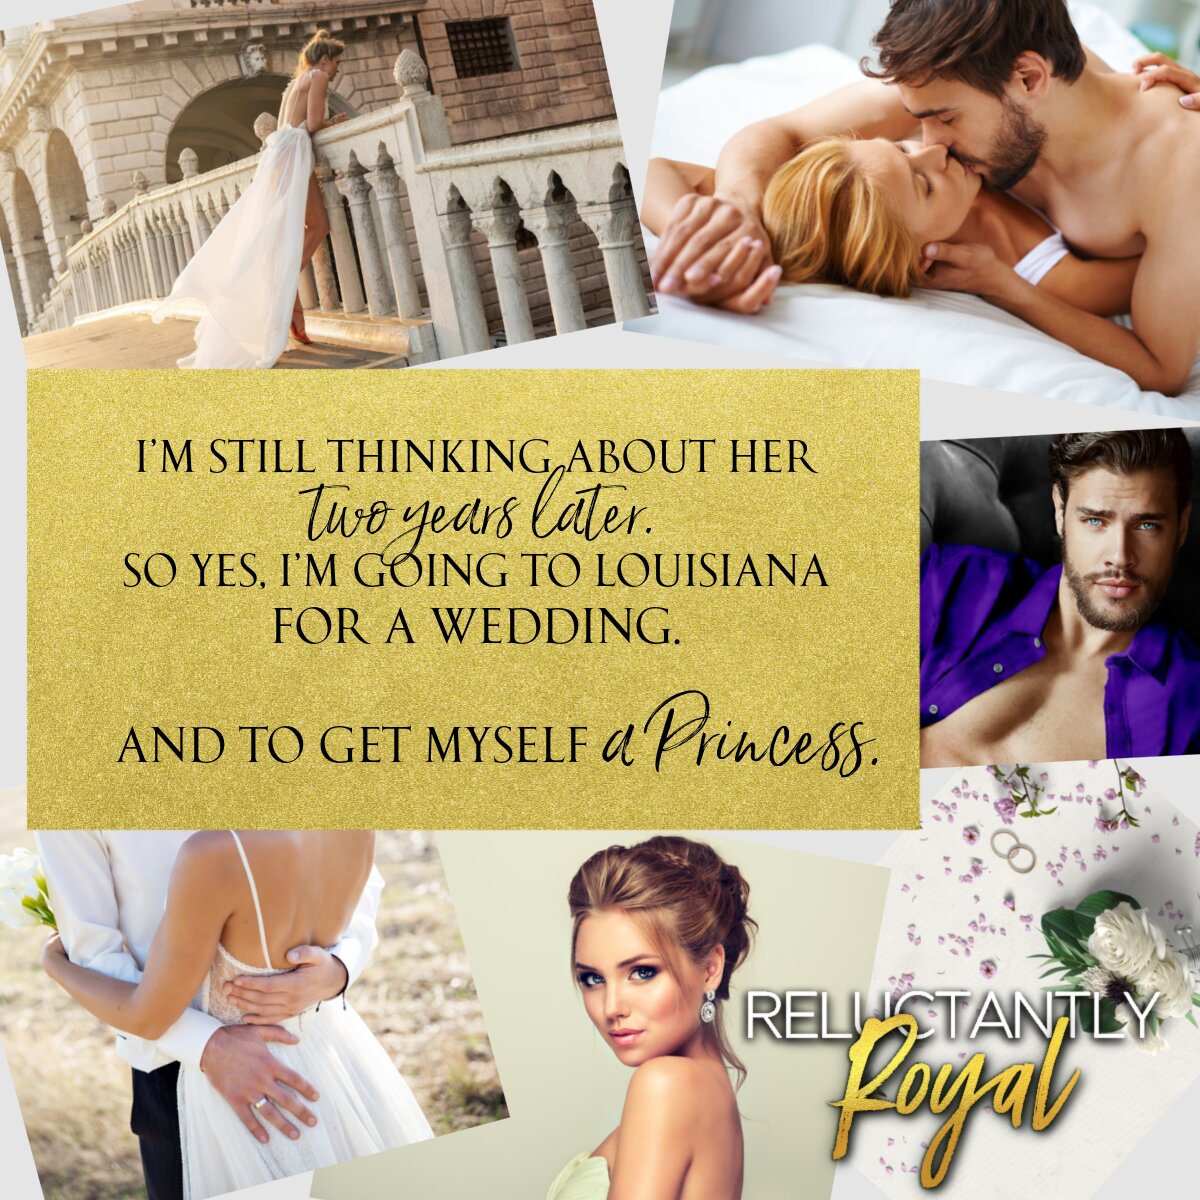 #NEW #KU “Wow! This is by far one of the best books I’ve ever read” Reluctantly Royal by Erin Nicholas w/a Erin Nicolle #RoyalsGoneRogue bit.ly/3OV3XW4